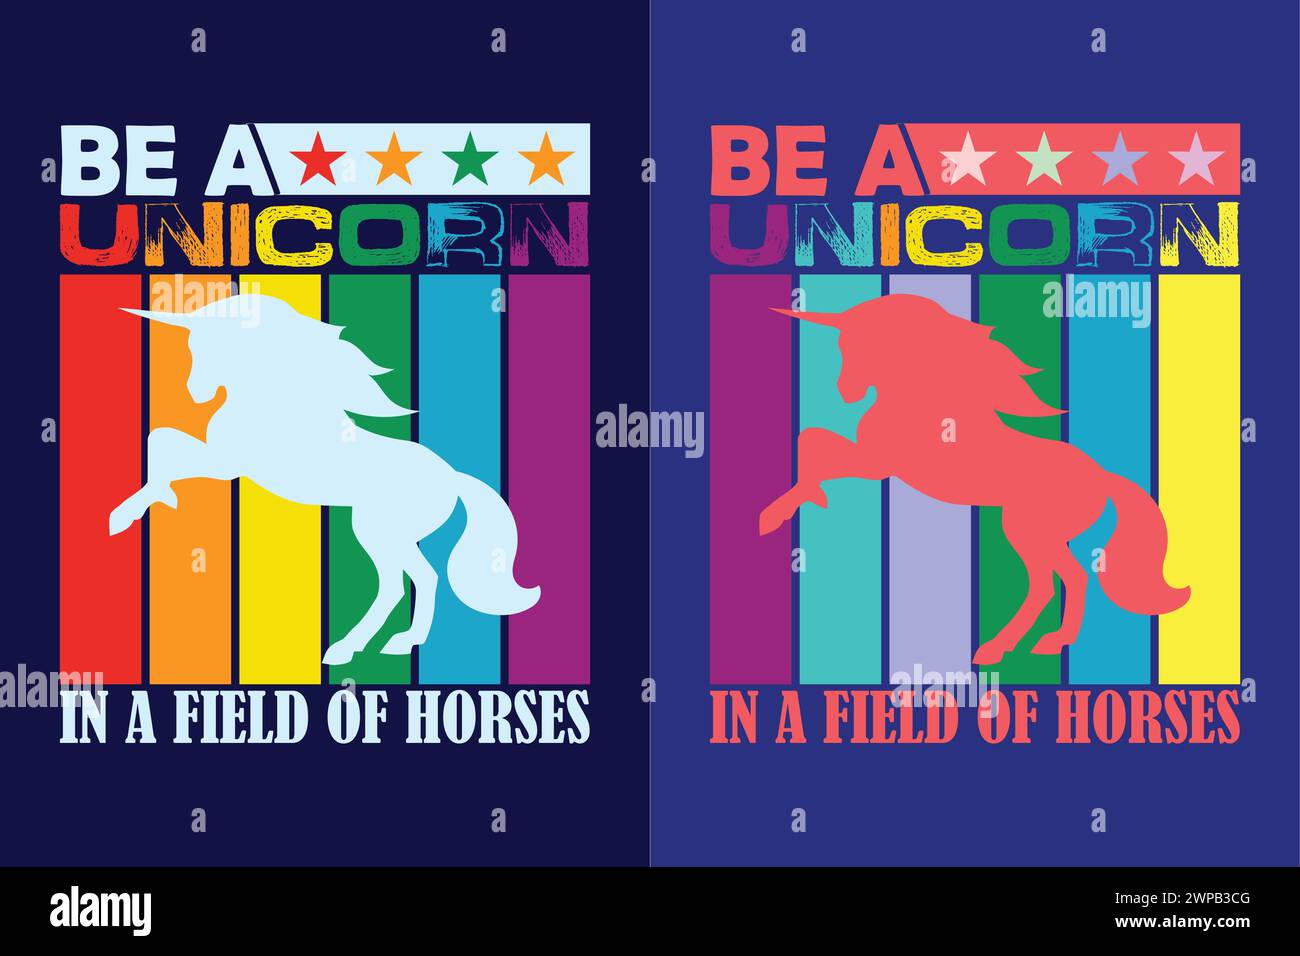 Be A Unicorn In A Field Of Horses, Animal Lover Shirt, My Spirit Animal